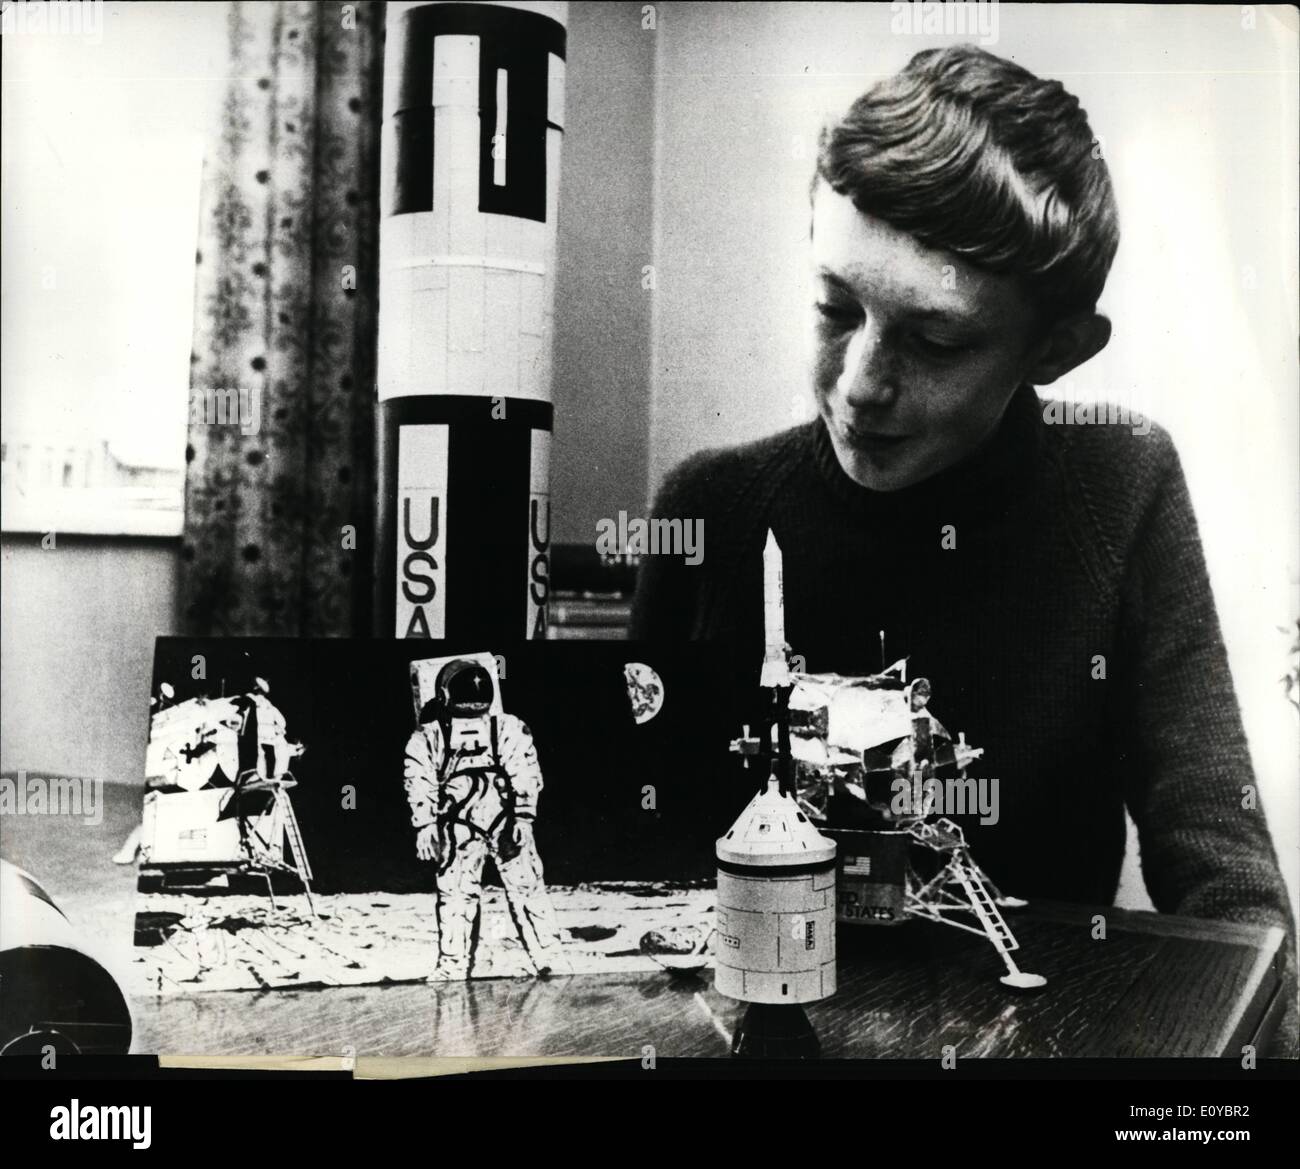 Aug. 08, 1969 - Accuracy of Boy's Painting of Moon Landing Amazes Experts. The accuracy of a painting of man's landing on the Moon, completed three weeks before it happened by a 16-year old boy, has amazed experts. Earlier this week, the artist schoolboy, David Heck Douglas, learned that his pen and ink painting has won him a trip round space control at Houston - and a possible meeting with the astronauts themselves. David's drawing shows a man on the moon near the spacecraft, and even includes the famous footprints on the moon's surface. It was voted by a panel of judges - including Mr Stock Photo